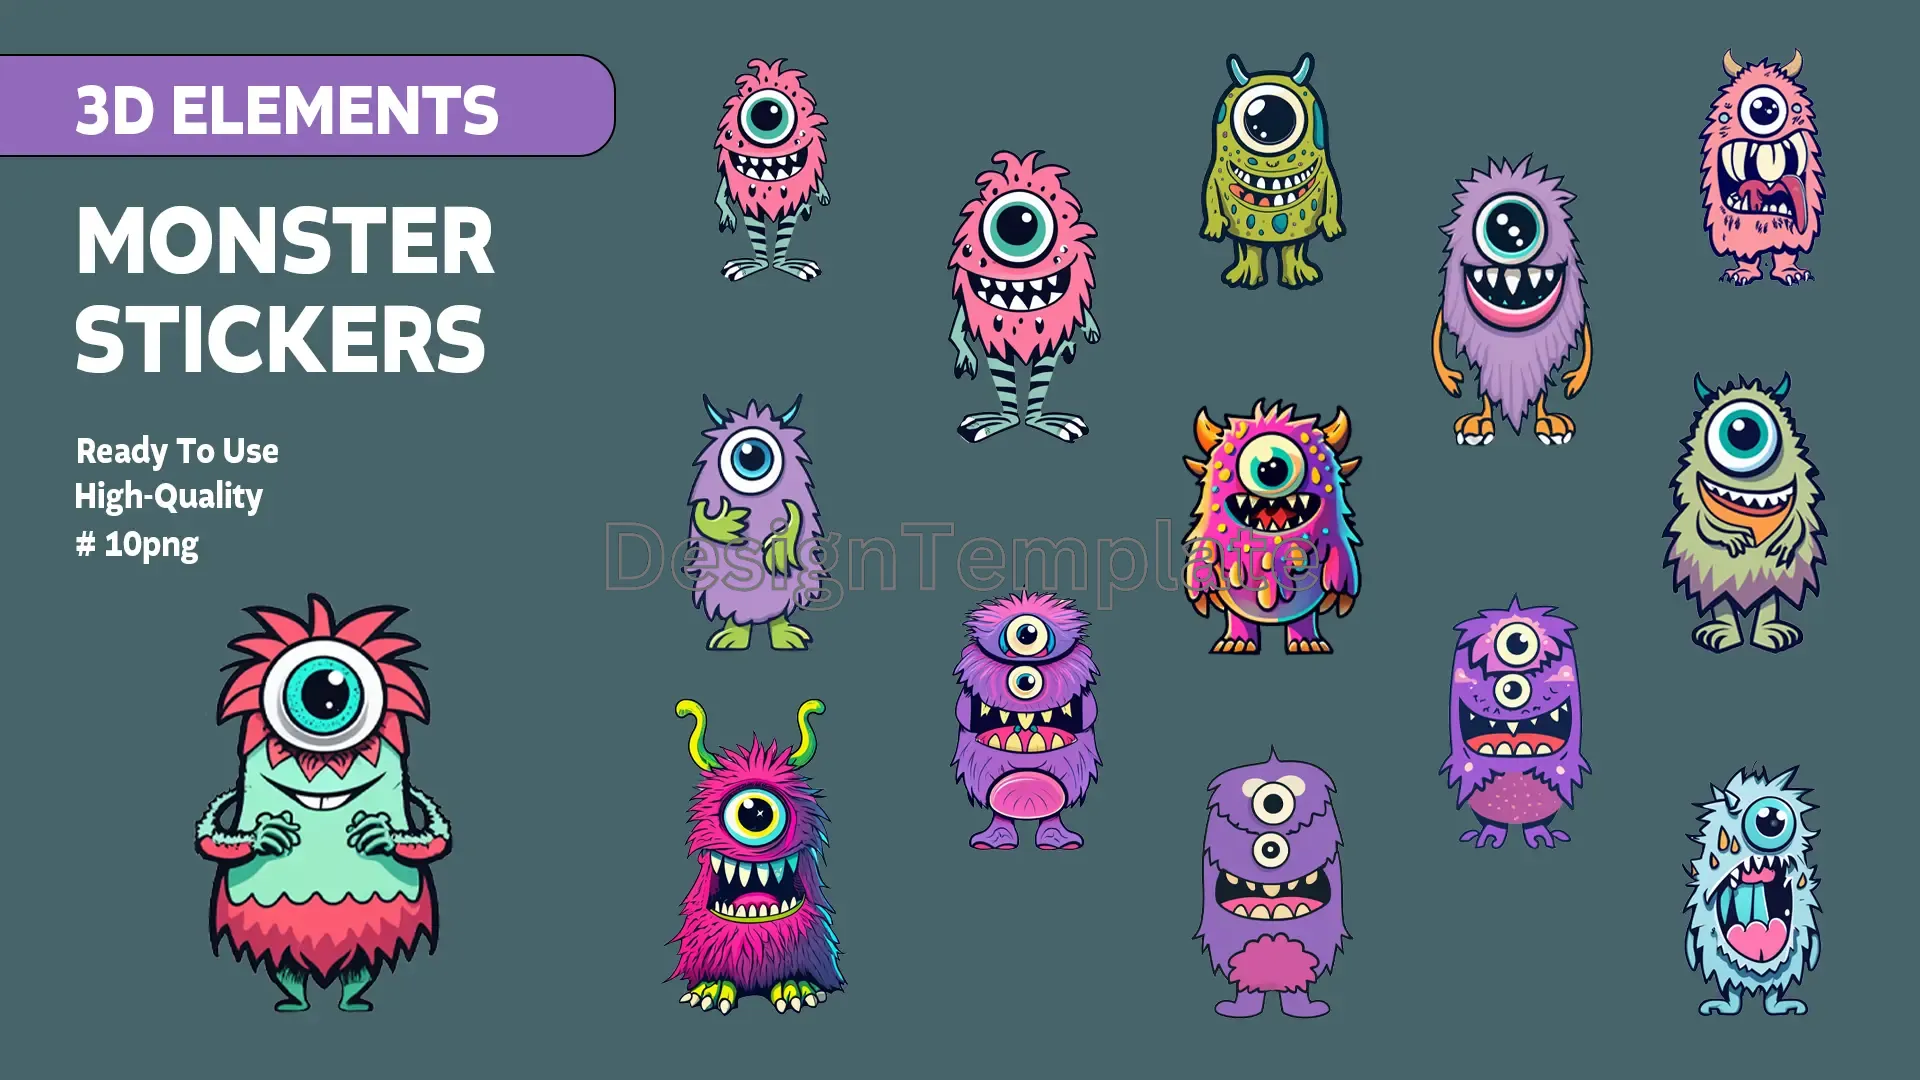 Beastly Stickers 3D Monster Elements Graphics Collection image